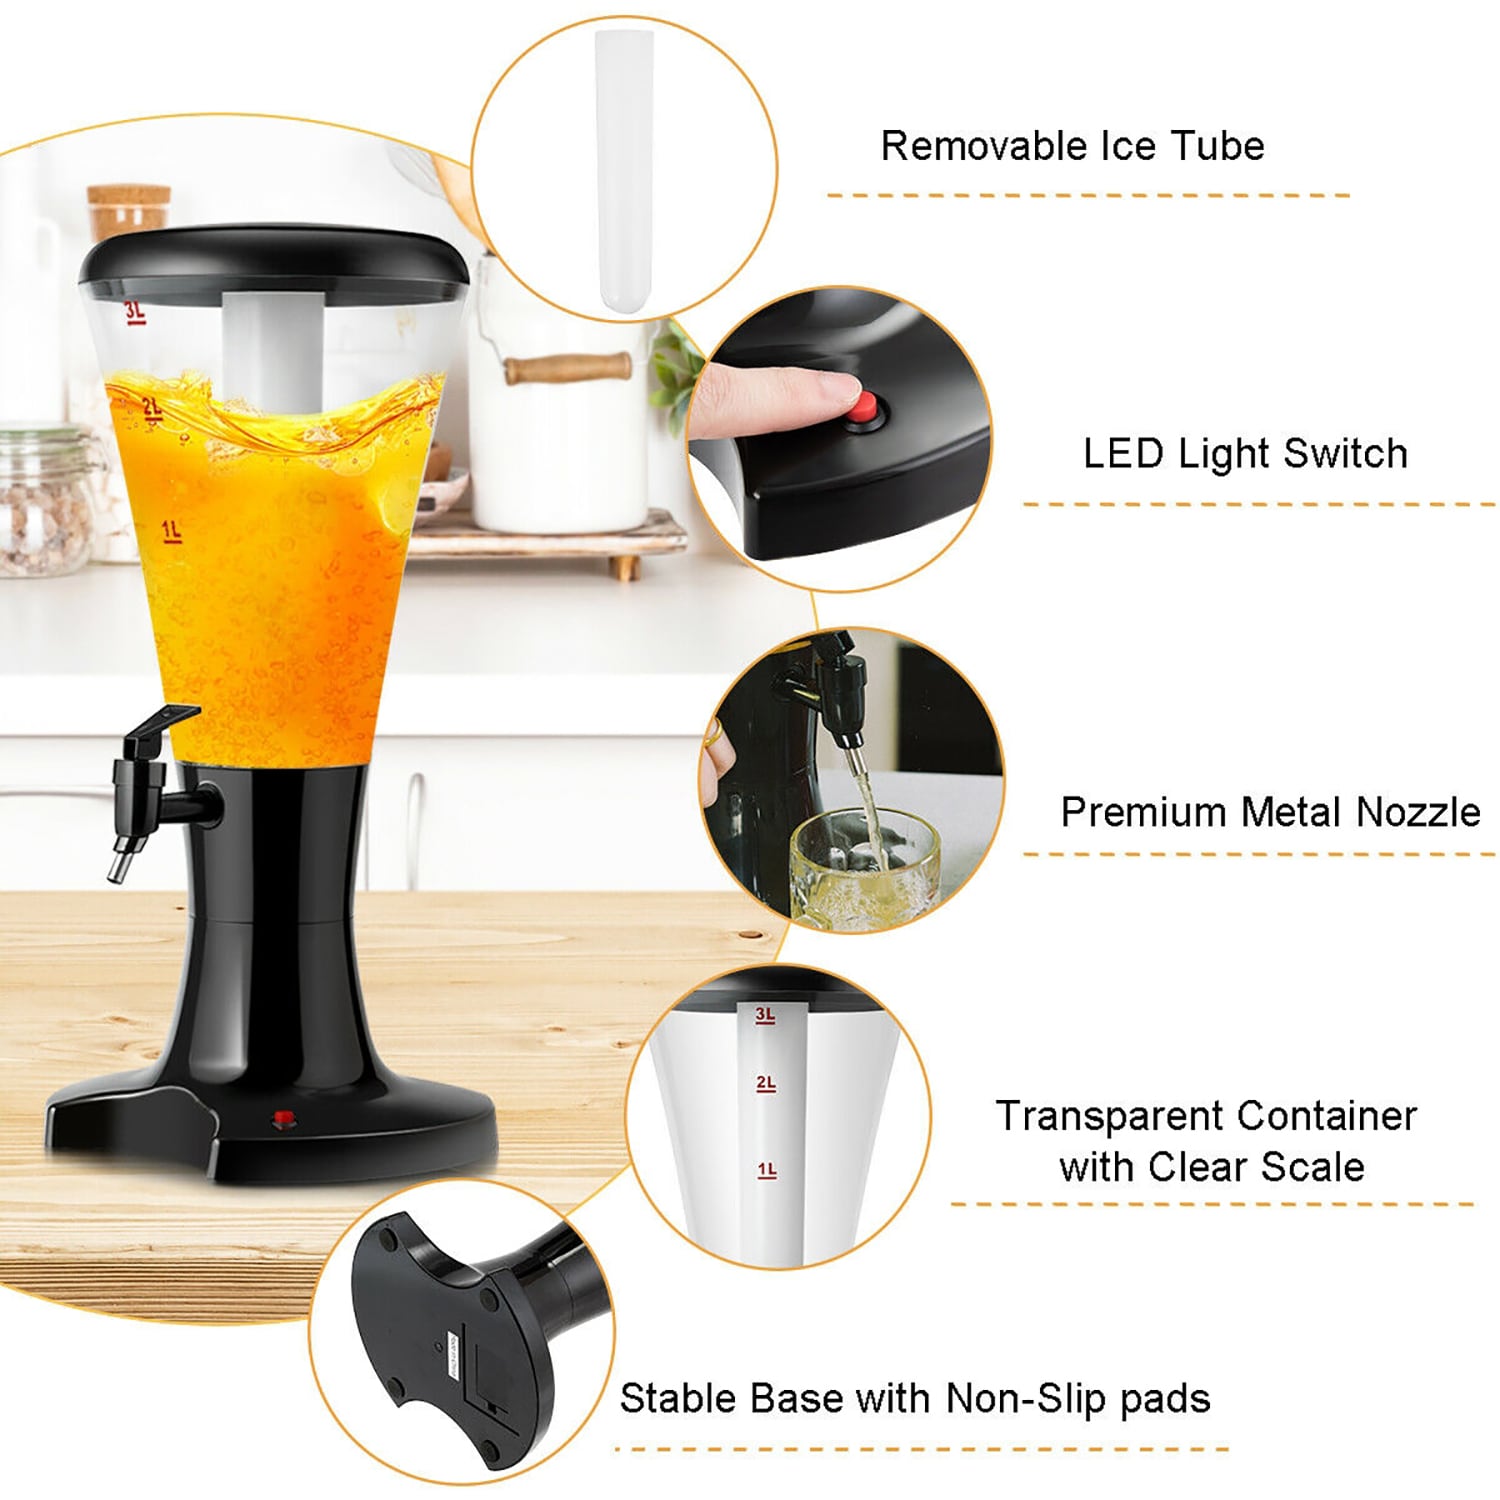 GZMR Black Poly Beverage Dispenser with Stand - 3L Capacity, Hot Beverage Compatible, Dishwasher Safe - Perfect for Parties | HYCC-25944-2-LC